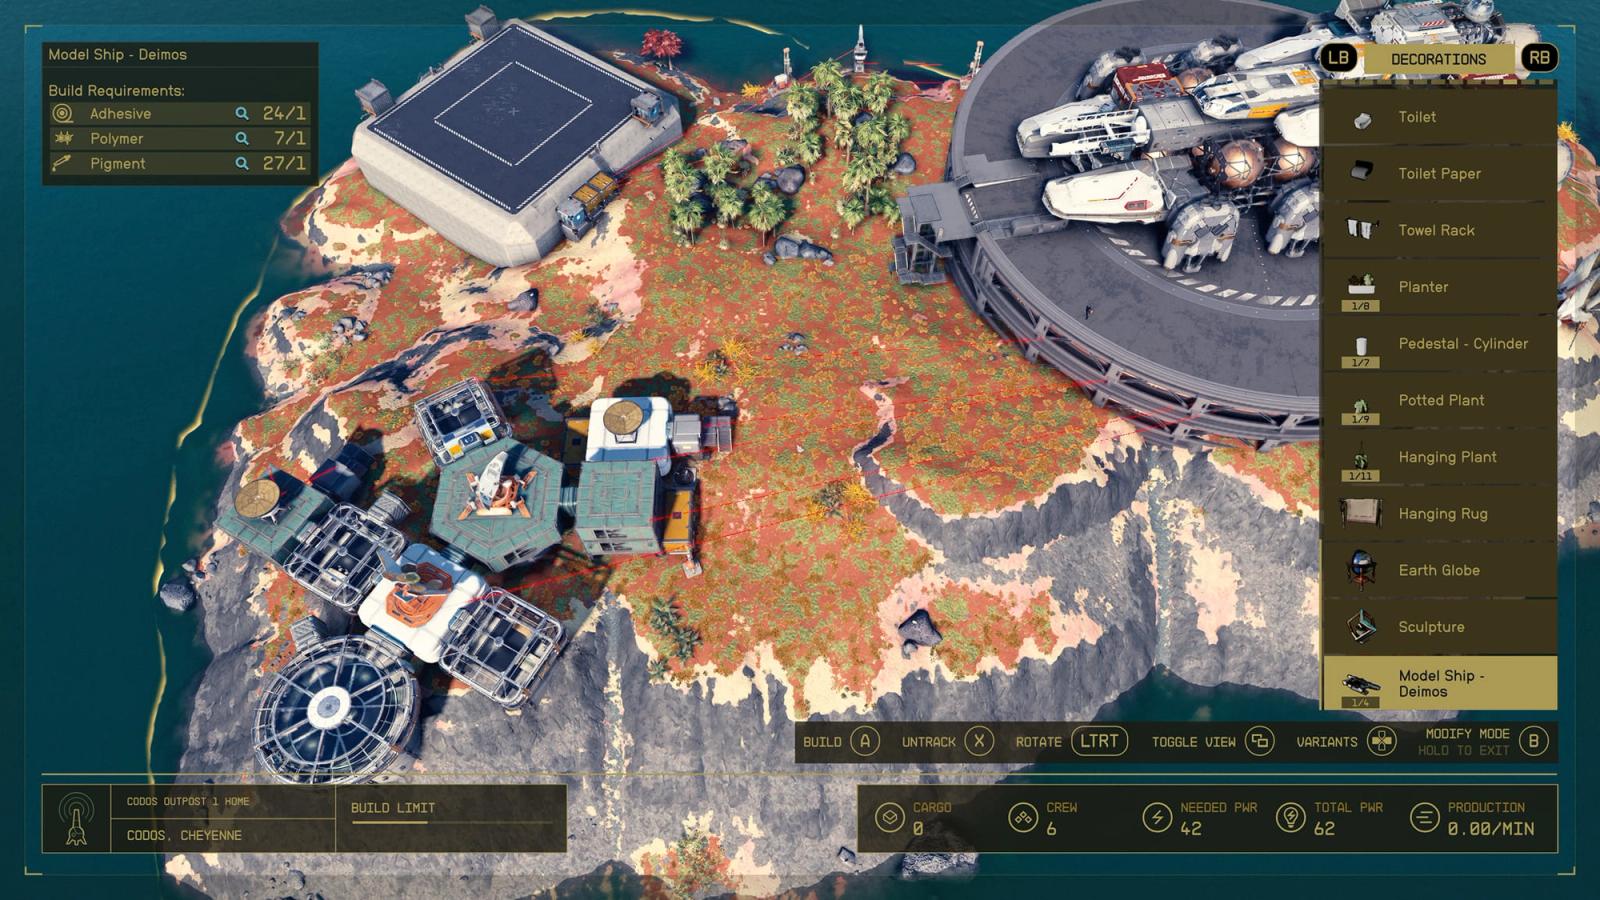 birds-eye-view-starfield-outpost-codos-michael-spence